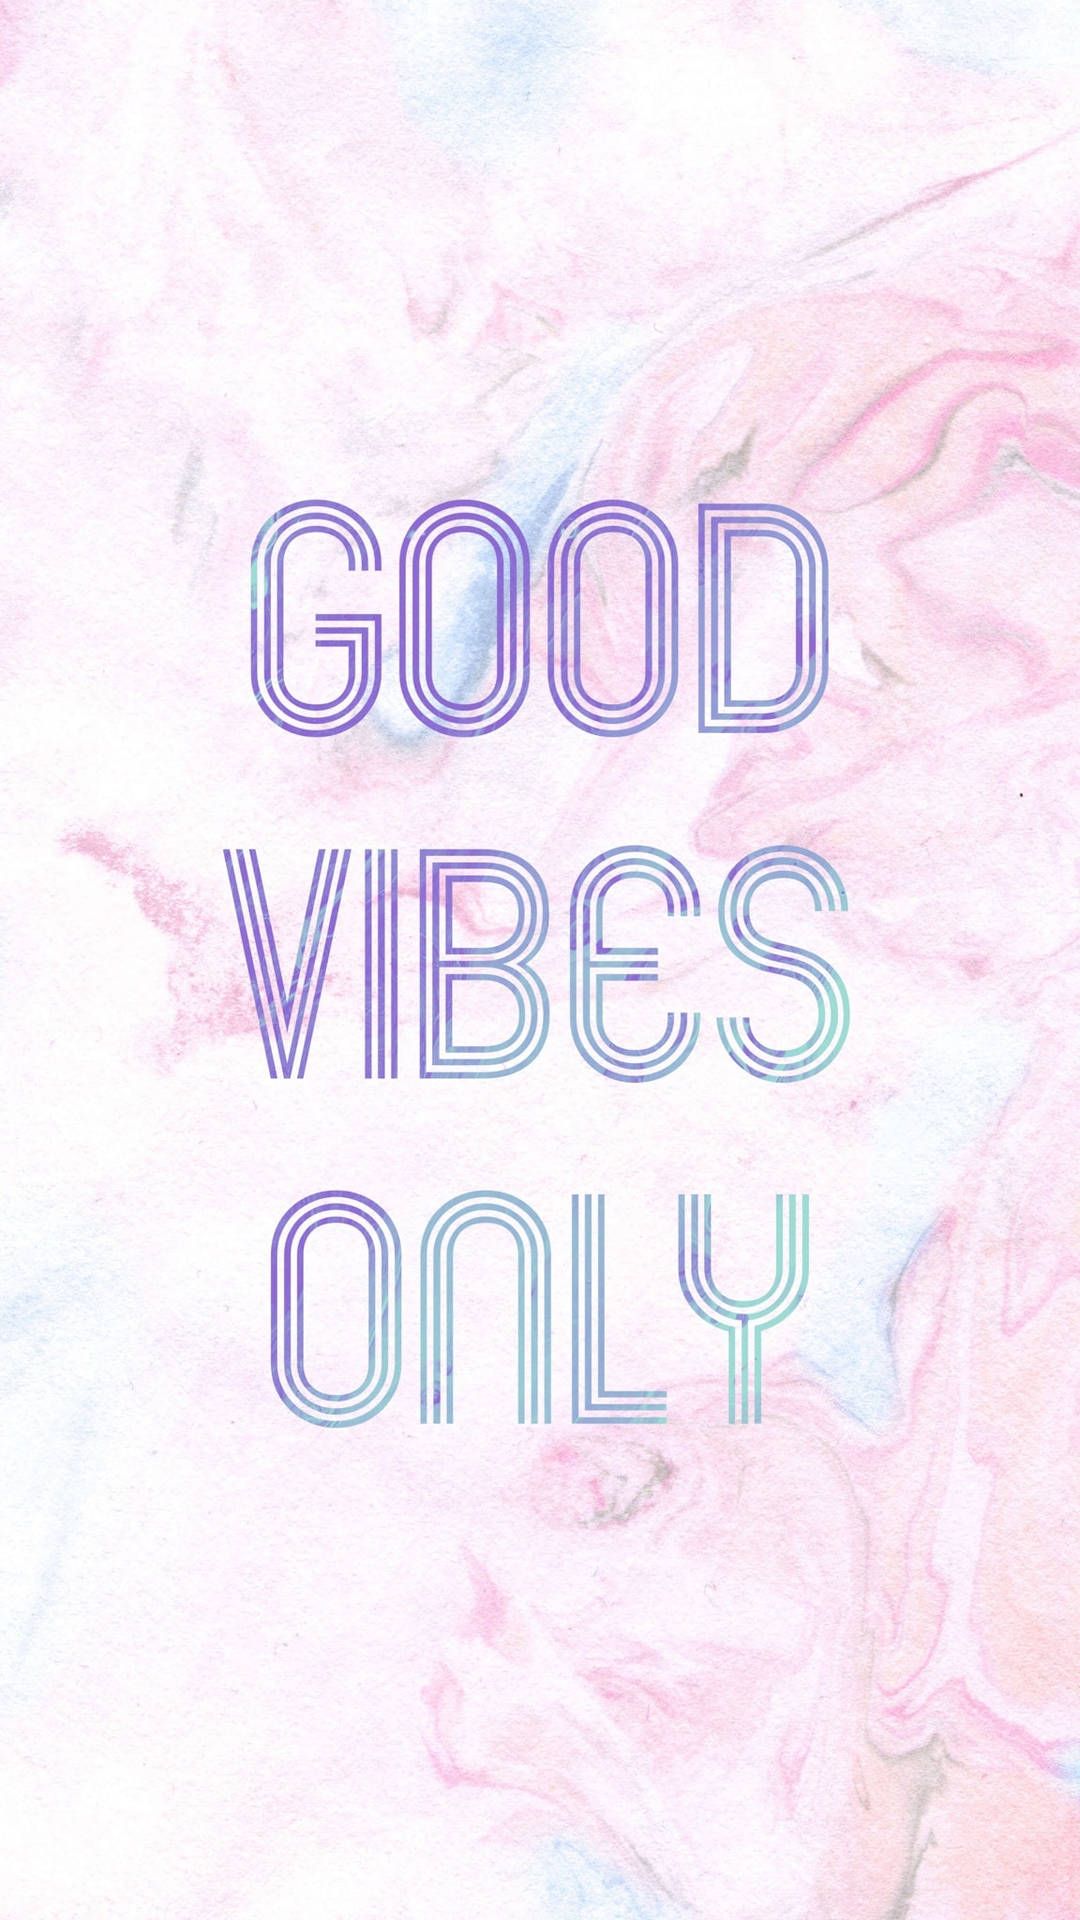 Vibes Wallpaper for FREE